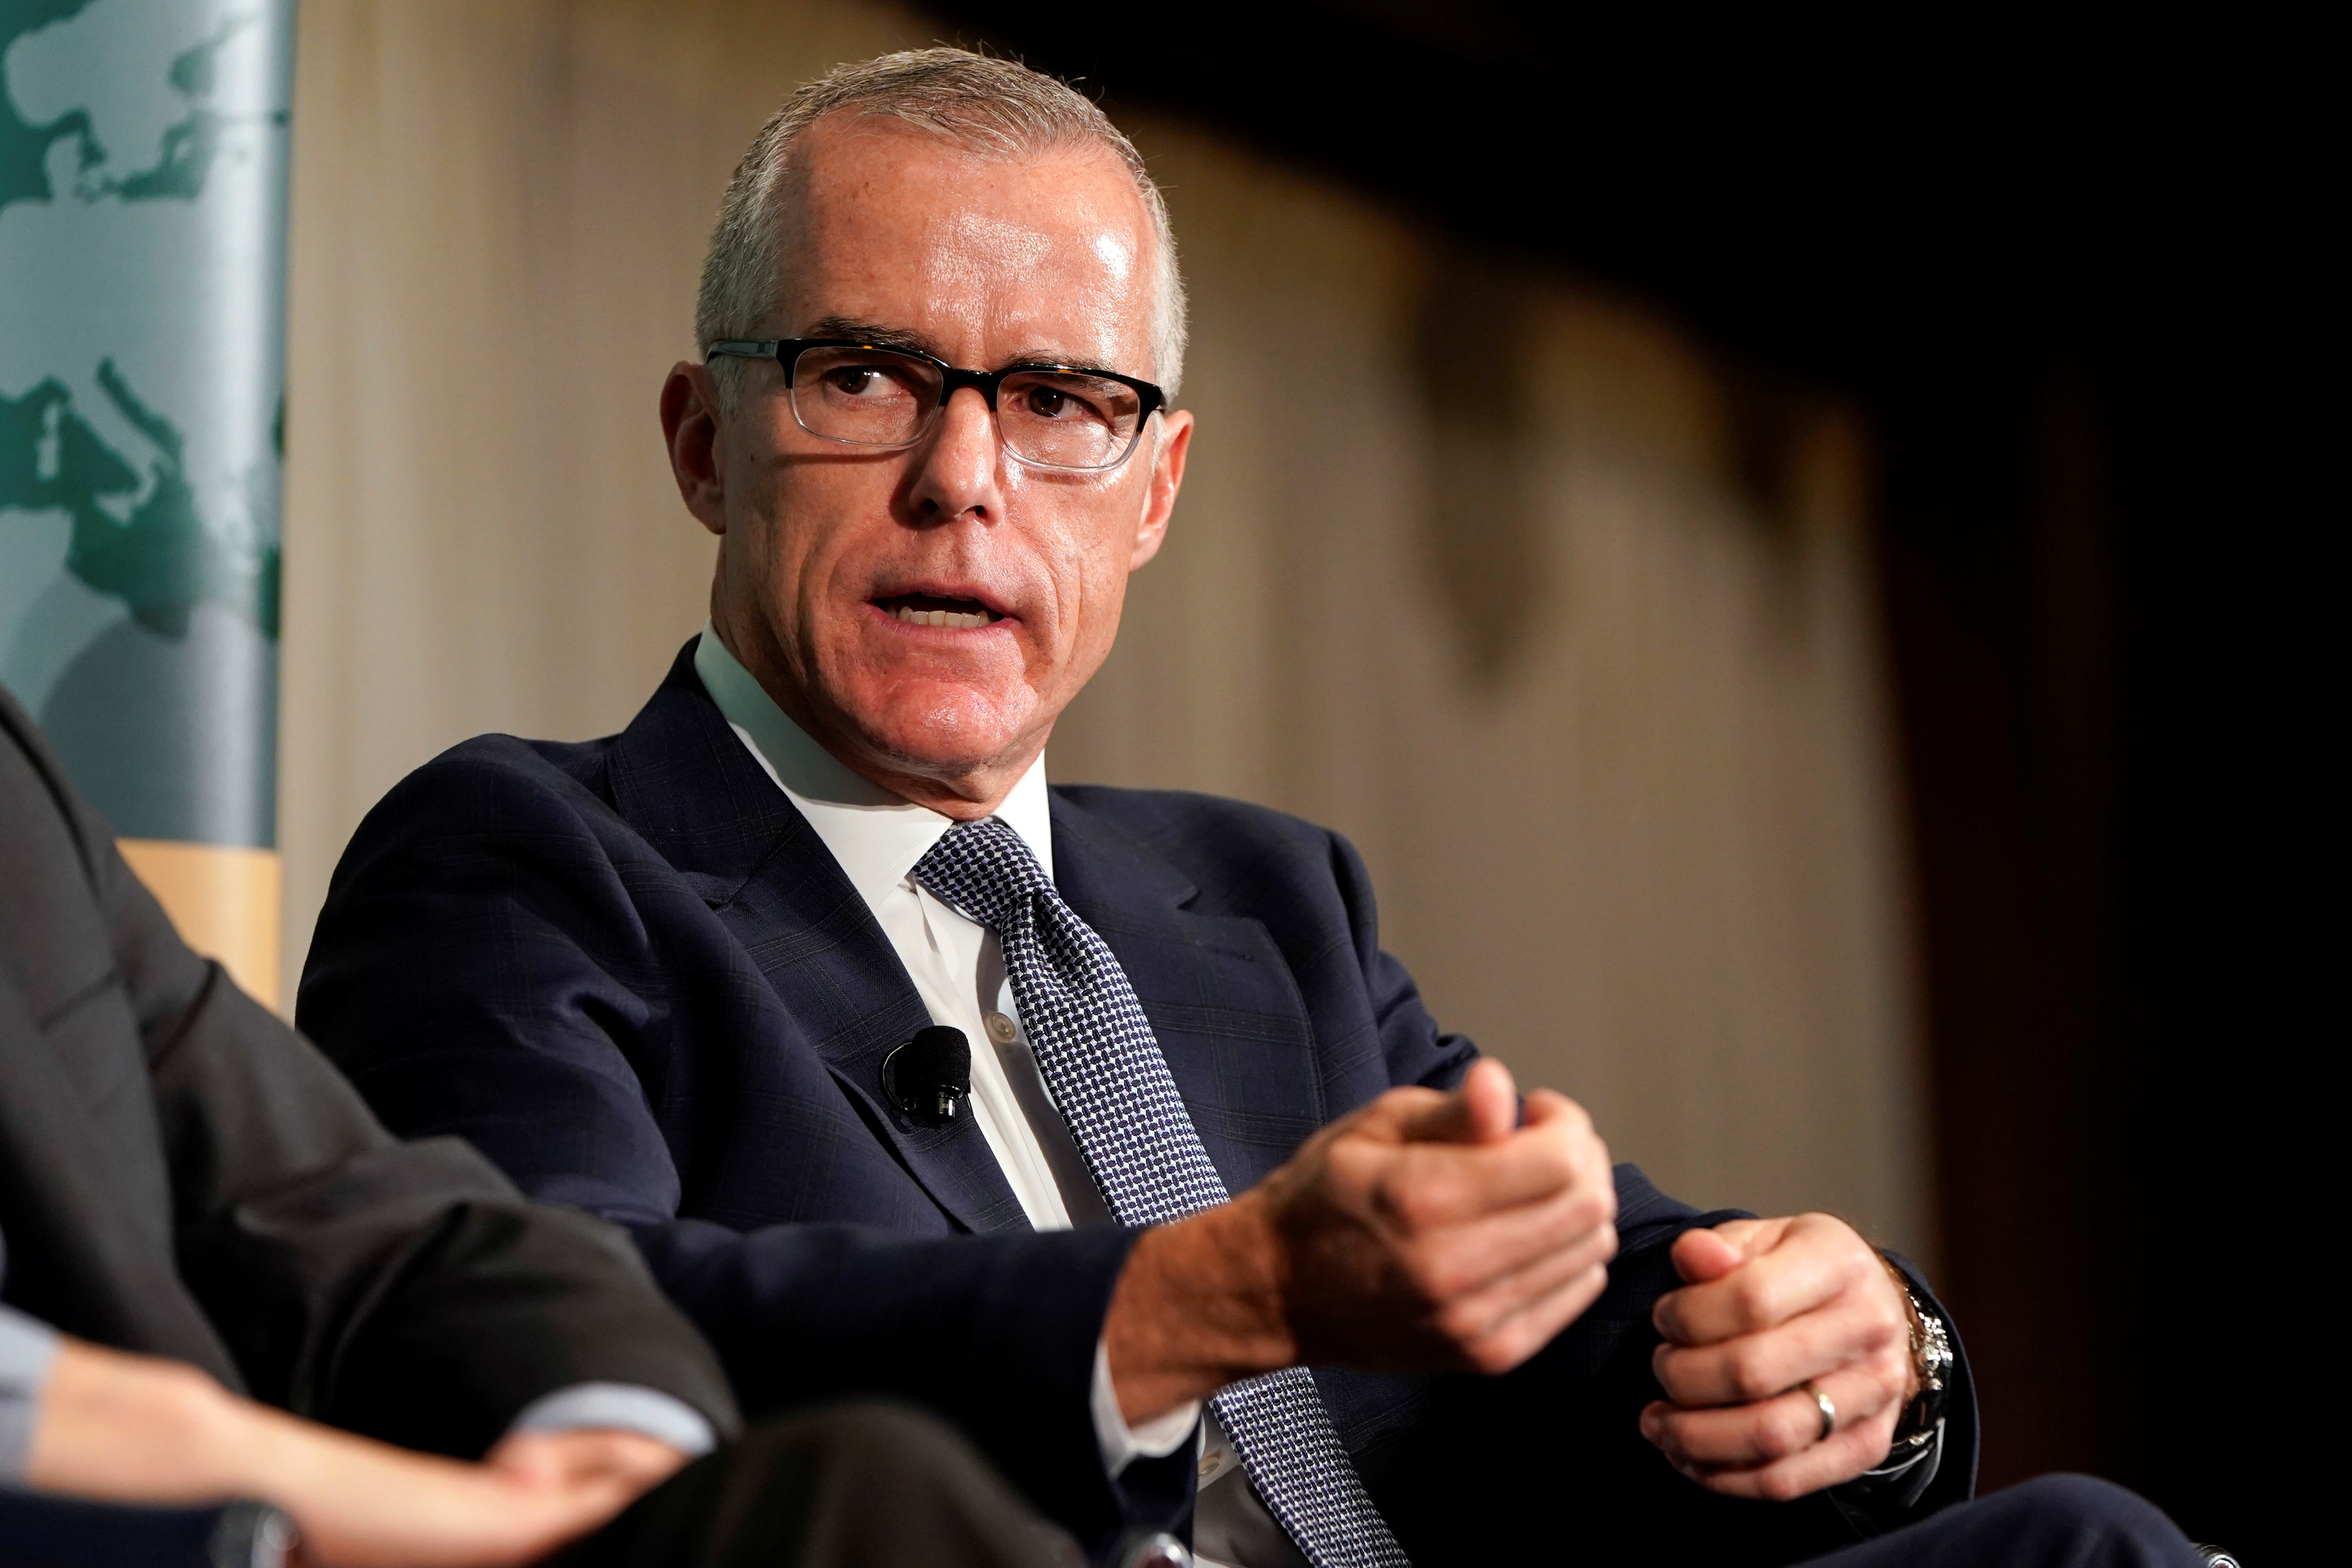 Former acting FBI director Andrew McCabe speaks during a forum on election security in Washington